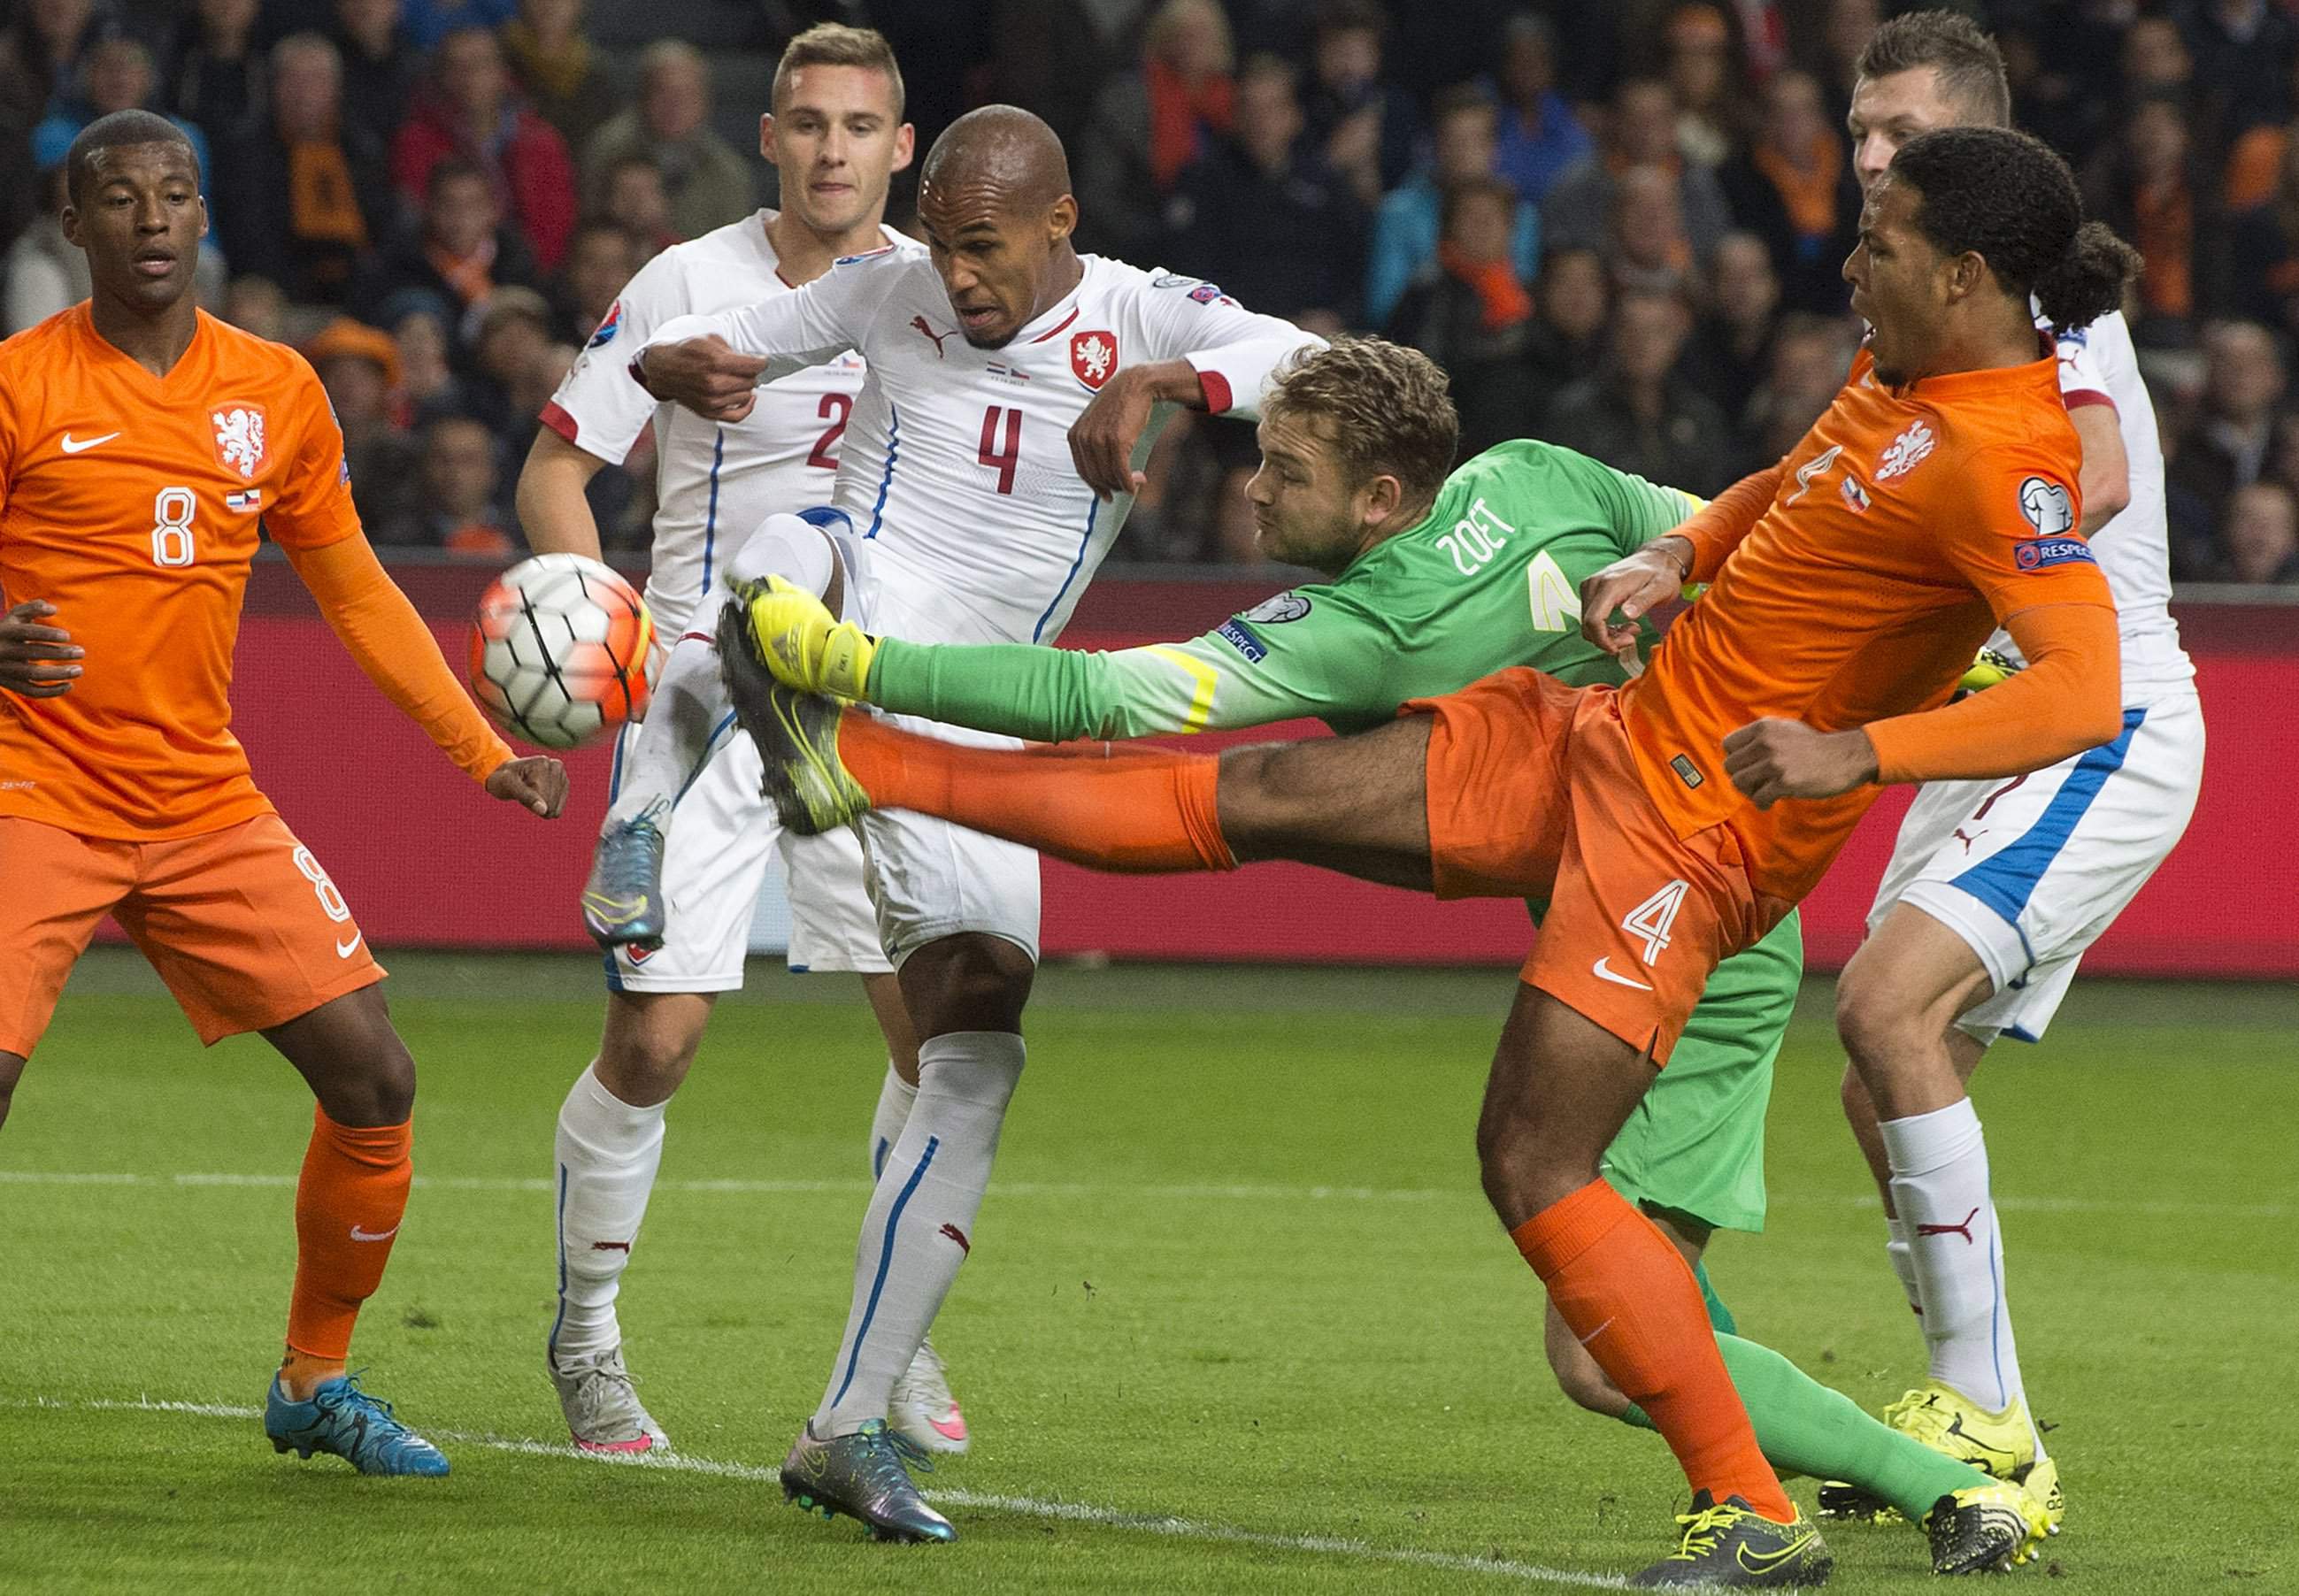 Goalkeeper Jeroen Zoet (C) of the Netherlands fights for the ball with Theodor Gebre Selassie of Czech Republic during their Euro 2016 group A qualifying soccer match in Amsterdam, Netherlands October 13, 2015.  REUTERS/Toussaint Kluiters/United Photos